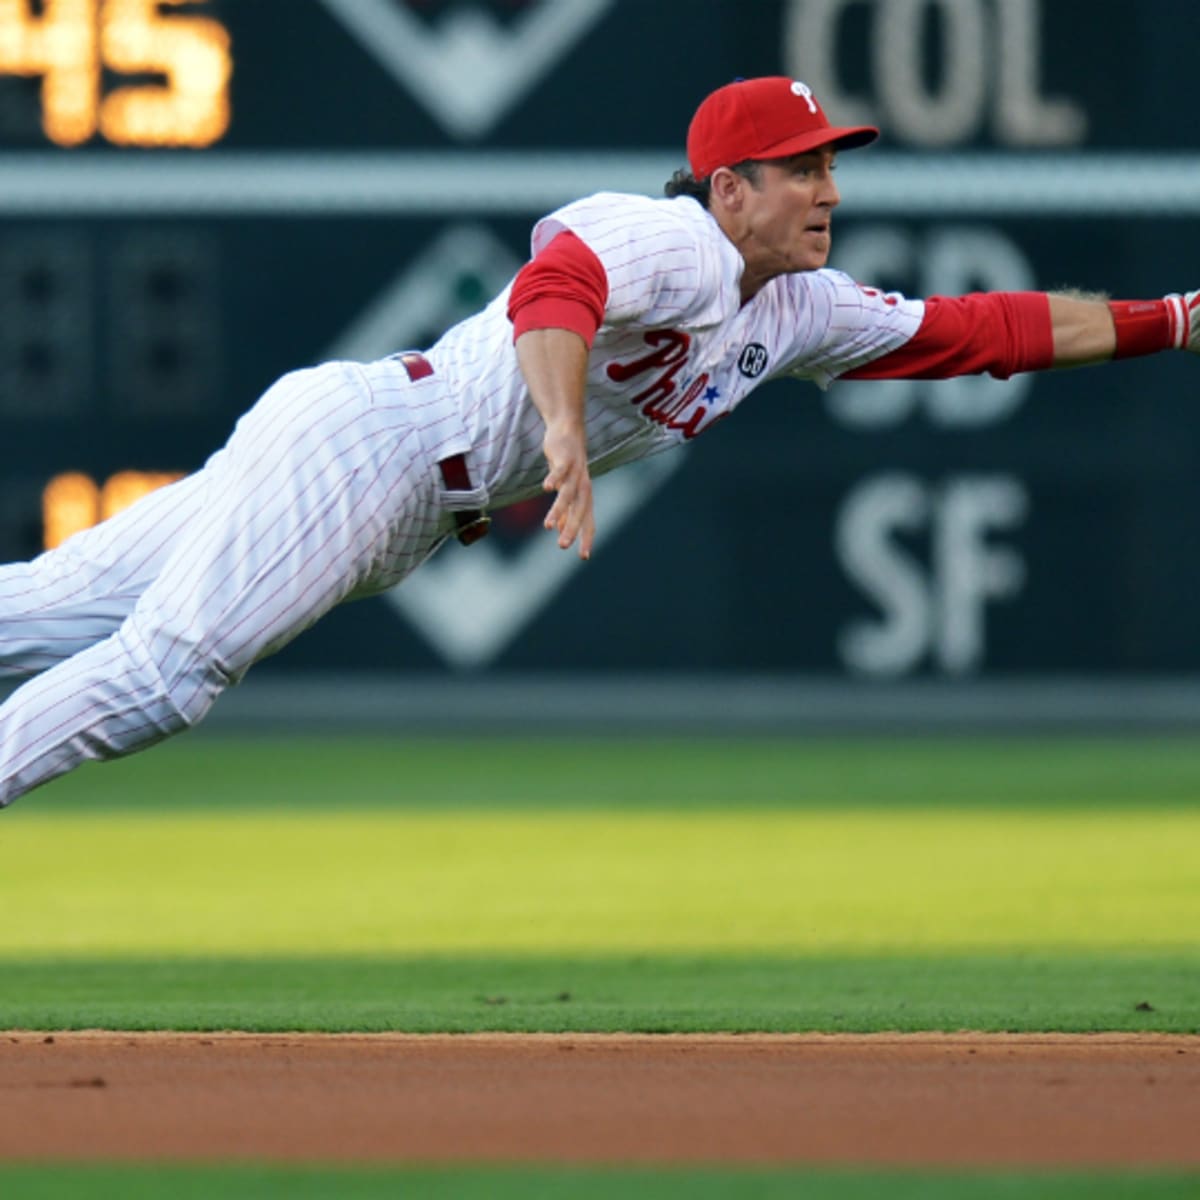 Chase Utley won't stay in London forever, and the Phillies would